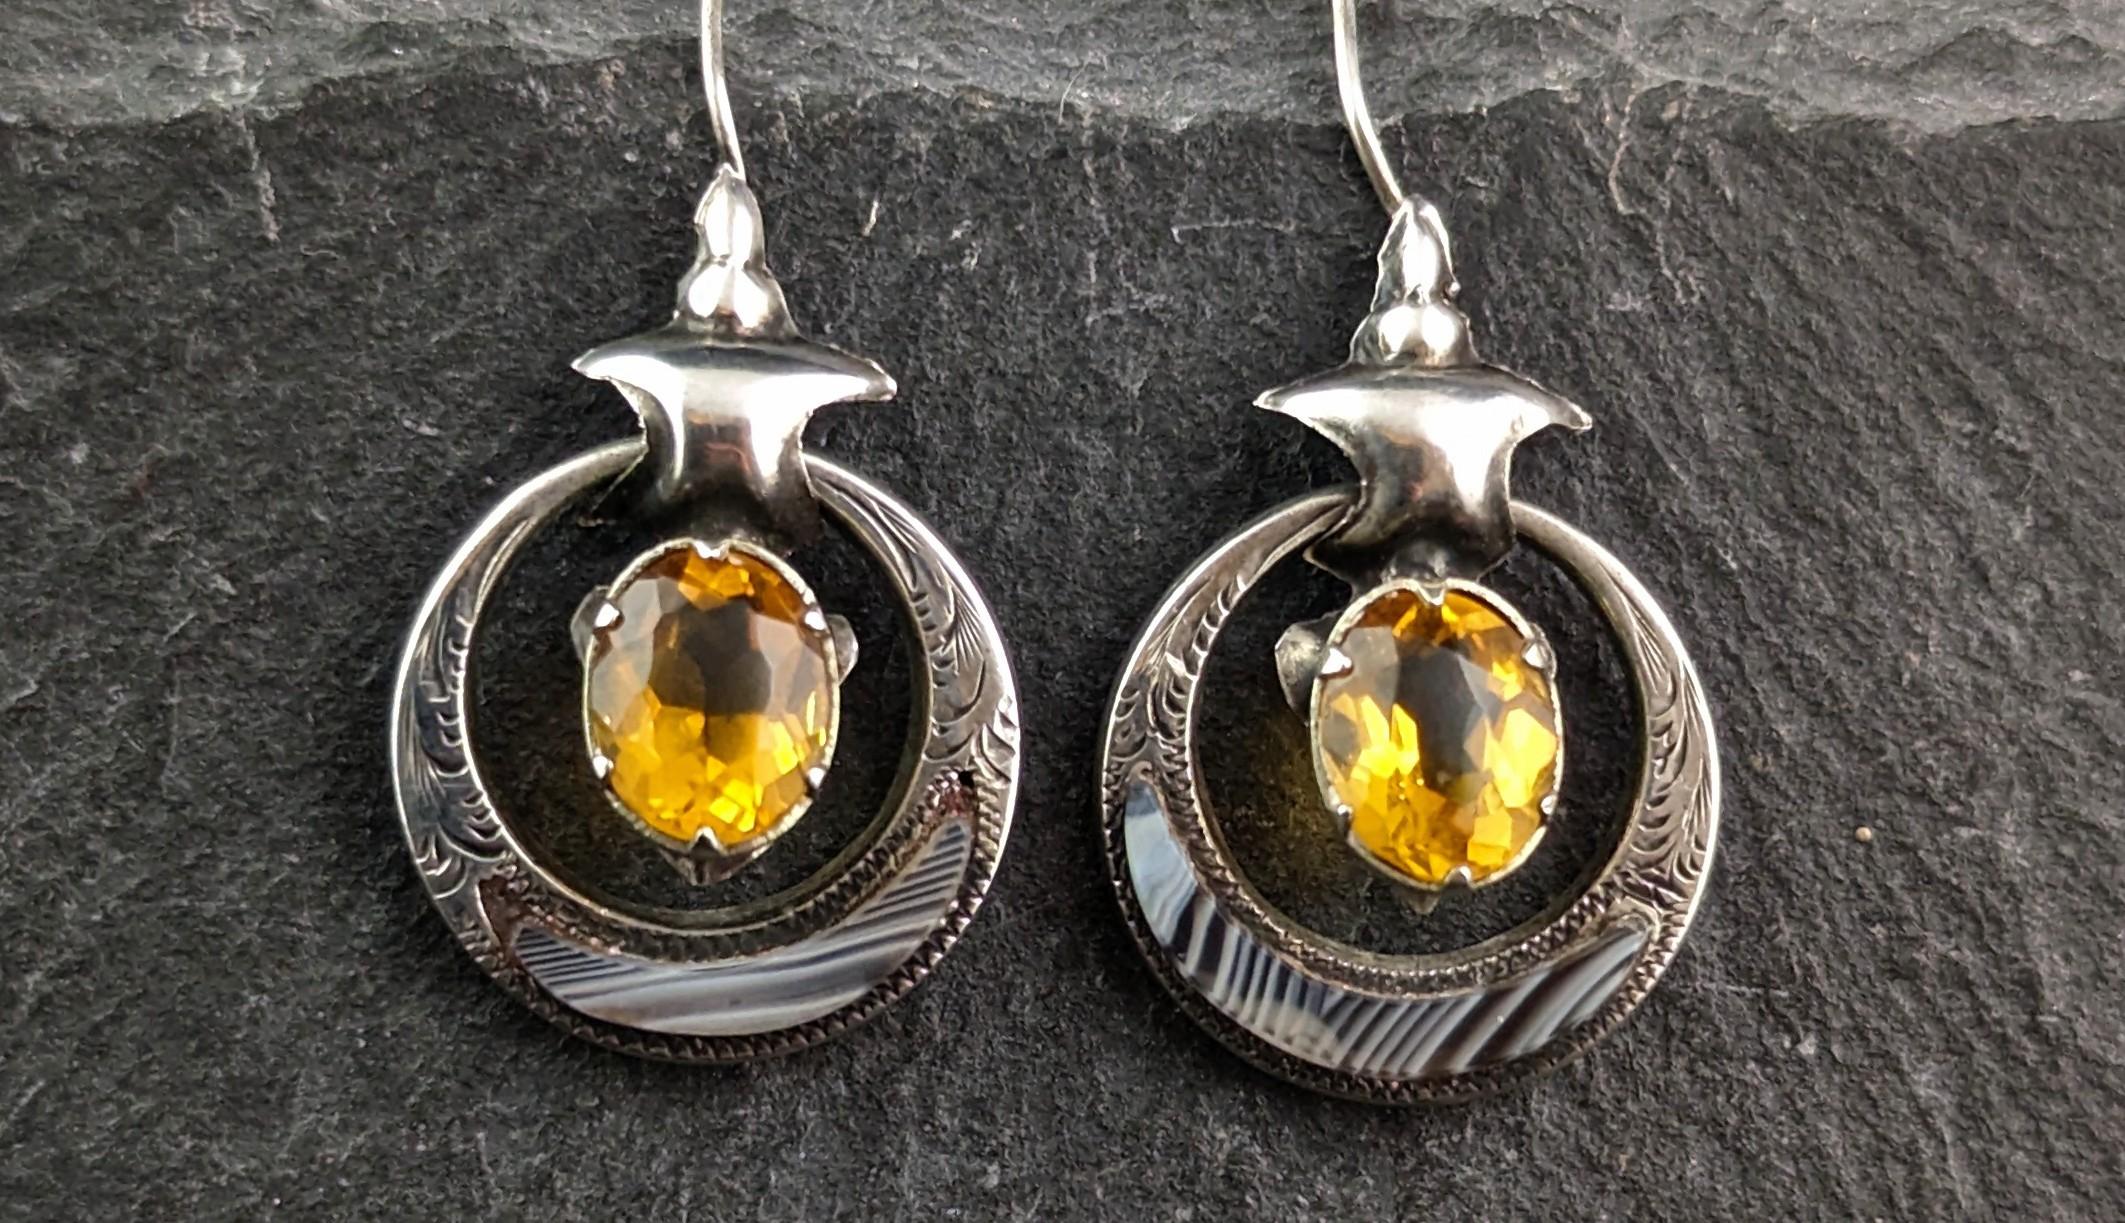 A beautiful pair of Antique, Victorian era sterling silver and Scottish agate drop earrings.

Crafted in the aesthetic era these earrings are made from sterling silver, the silver is pressed out or hollow which gives a heavy appearance without the